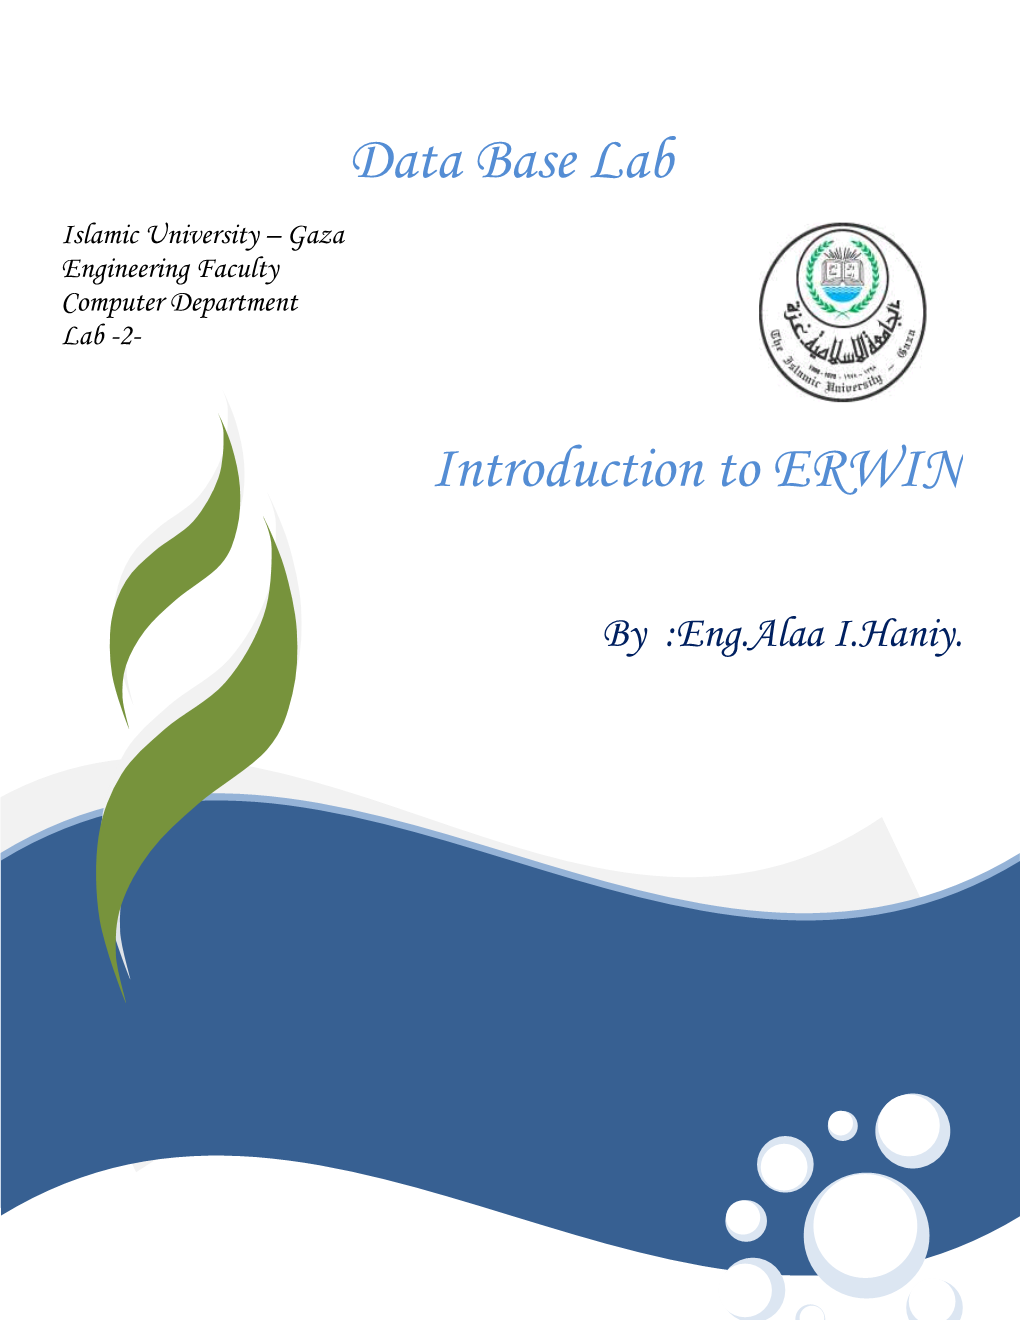 Data Base Lab Introduction to ERWIN